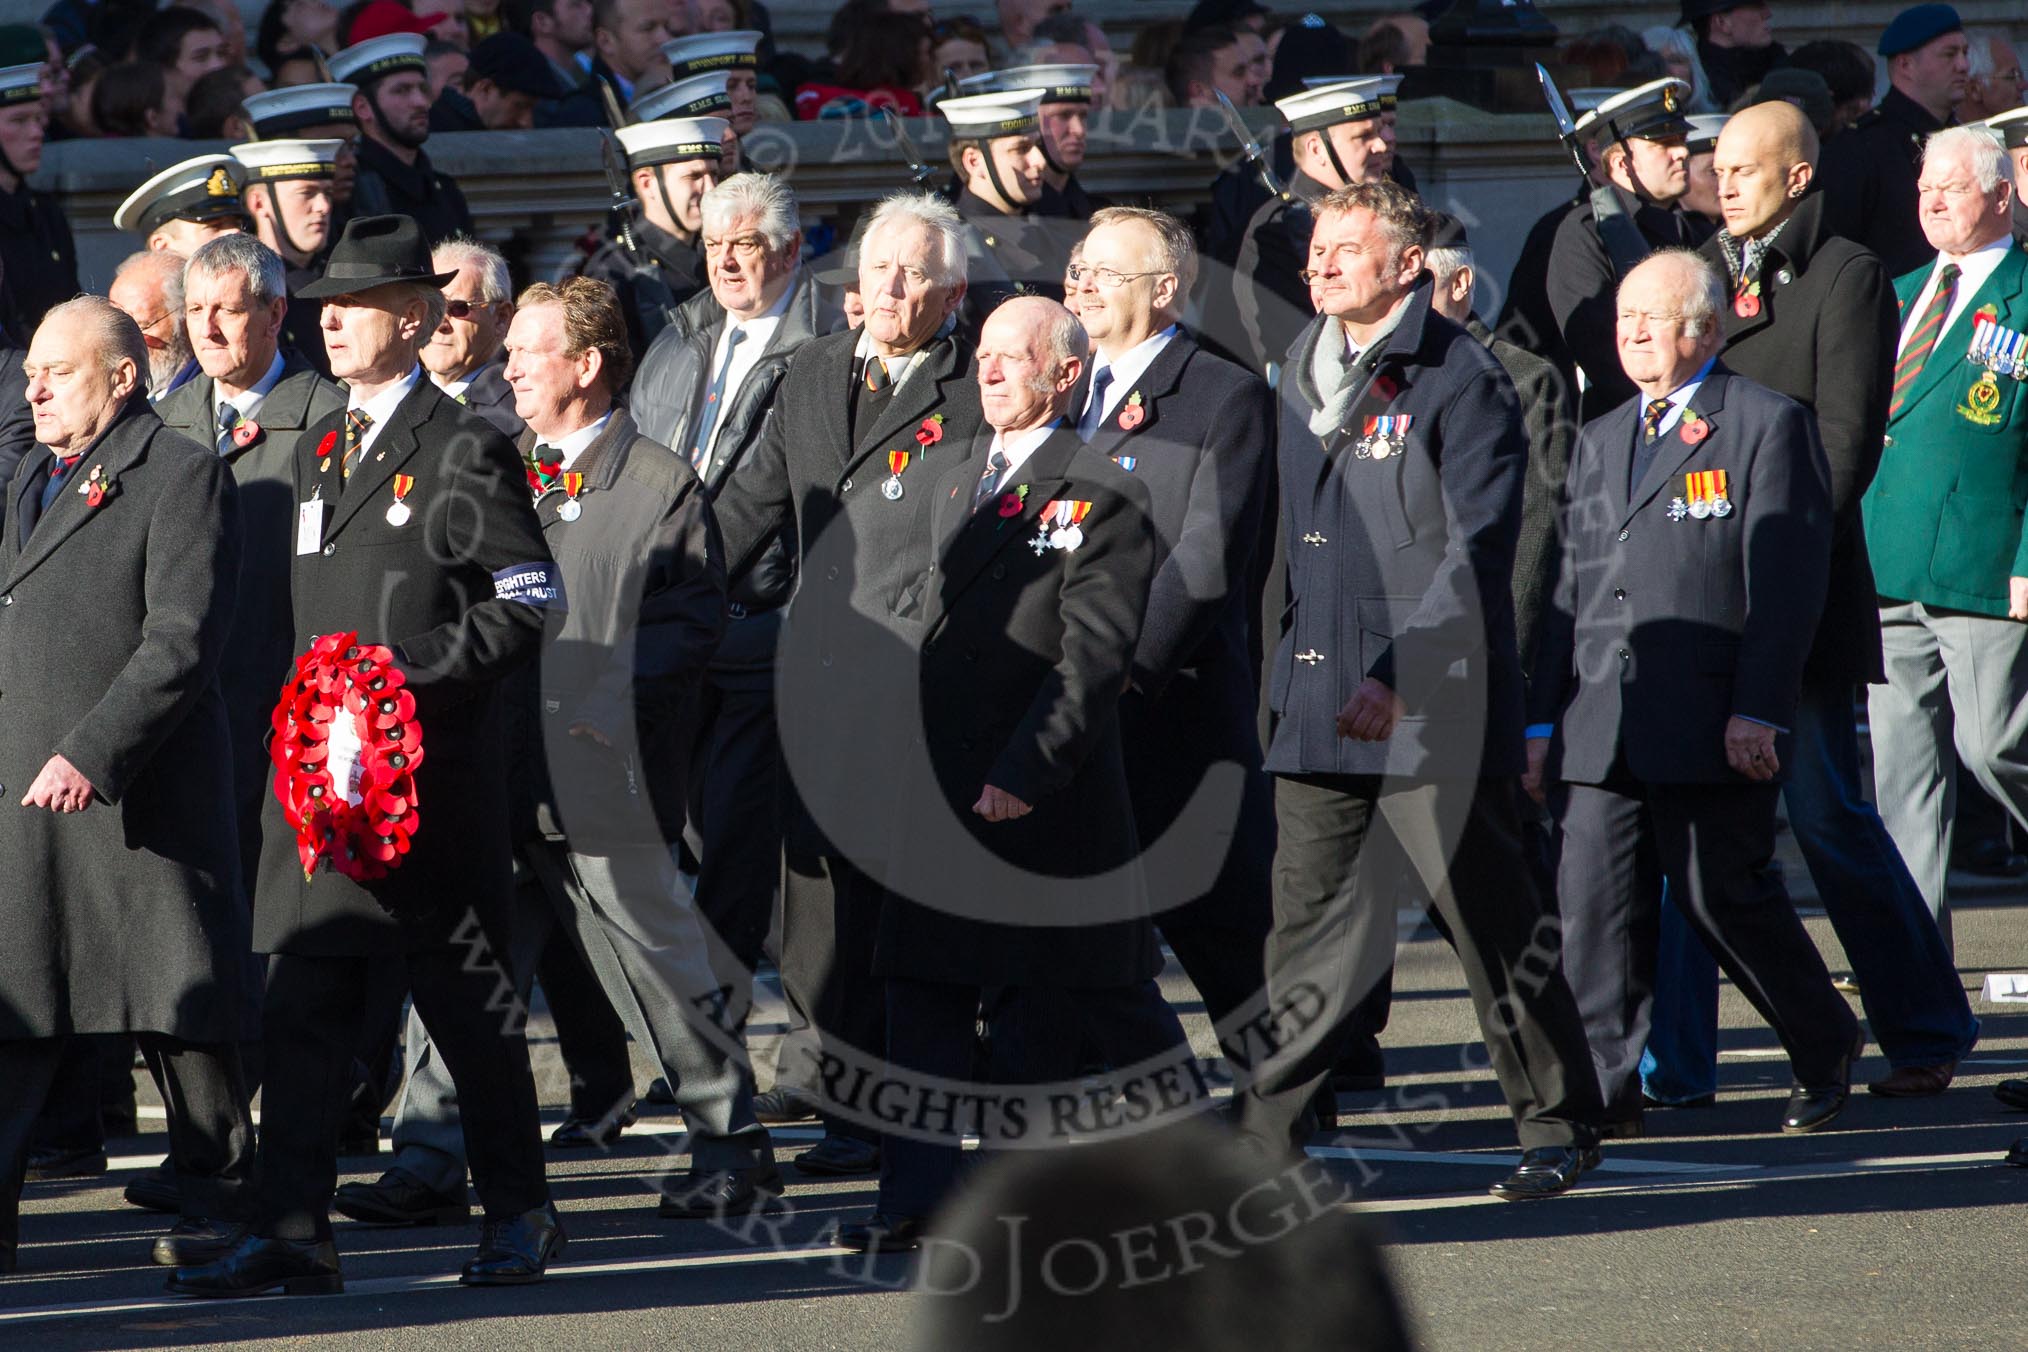 Remembrance Sunday 2012 Cenotaph March Past: Group M17 - St Andrew's Ambulance Association, and M18 - Firefighters Memorial Charitable Trust..
Whitehall, Cenotaph,
London SW1,

United Kingdom,
on 11 November 2012 at 12:11, image #1542